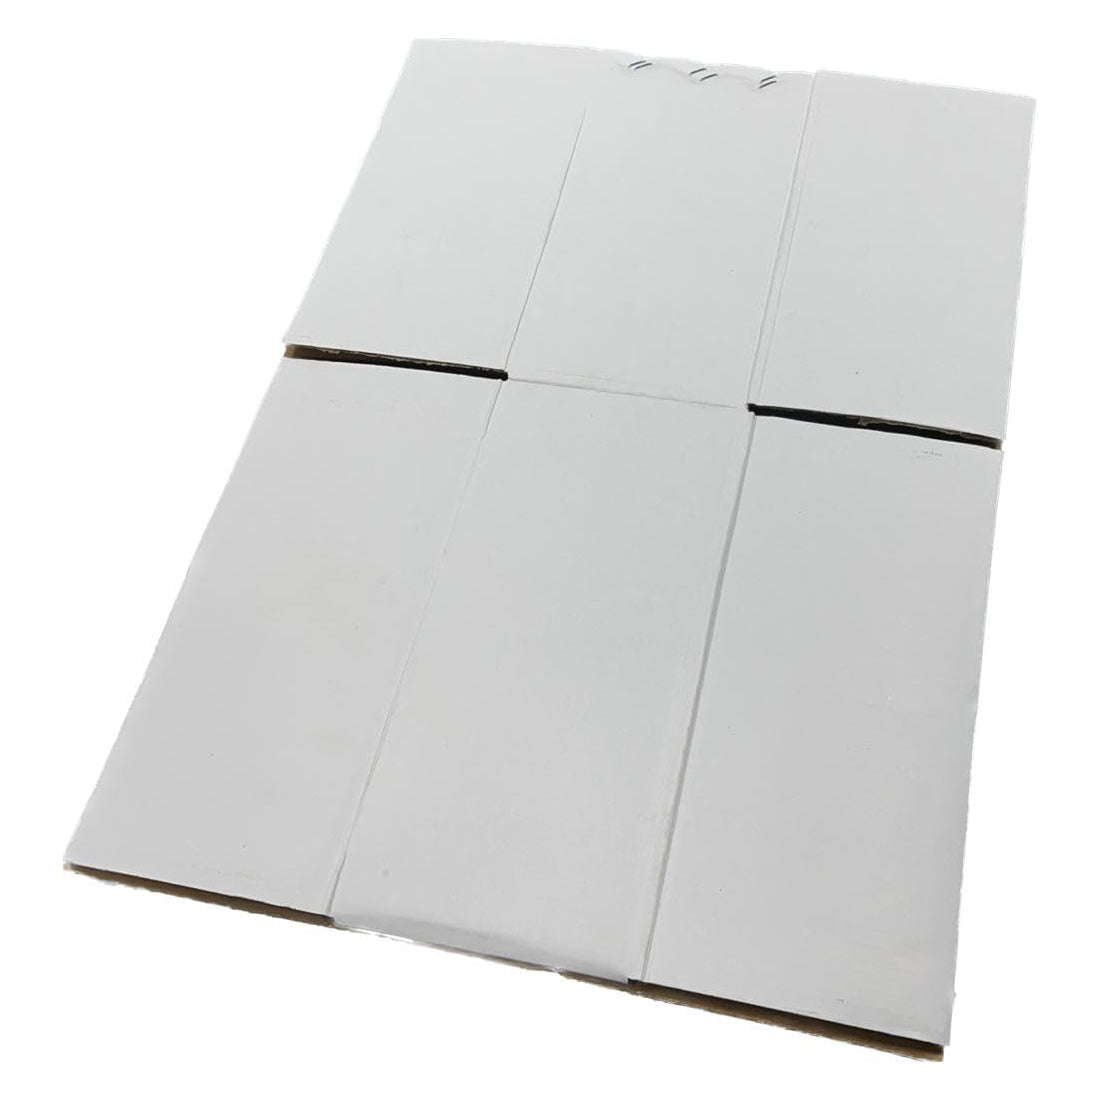 5 Ply White Corrugated Box For Packing (13.38X11.61X6 inches) - Pack of 10 Boxes